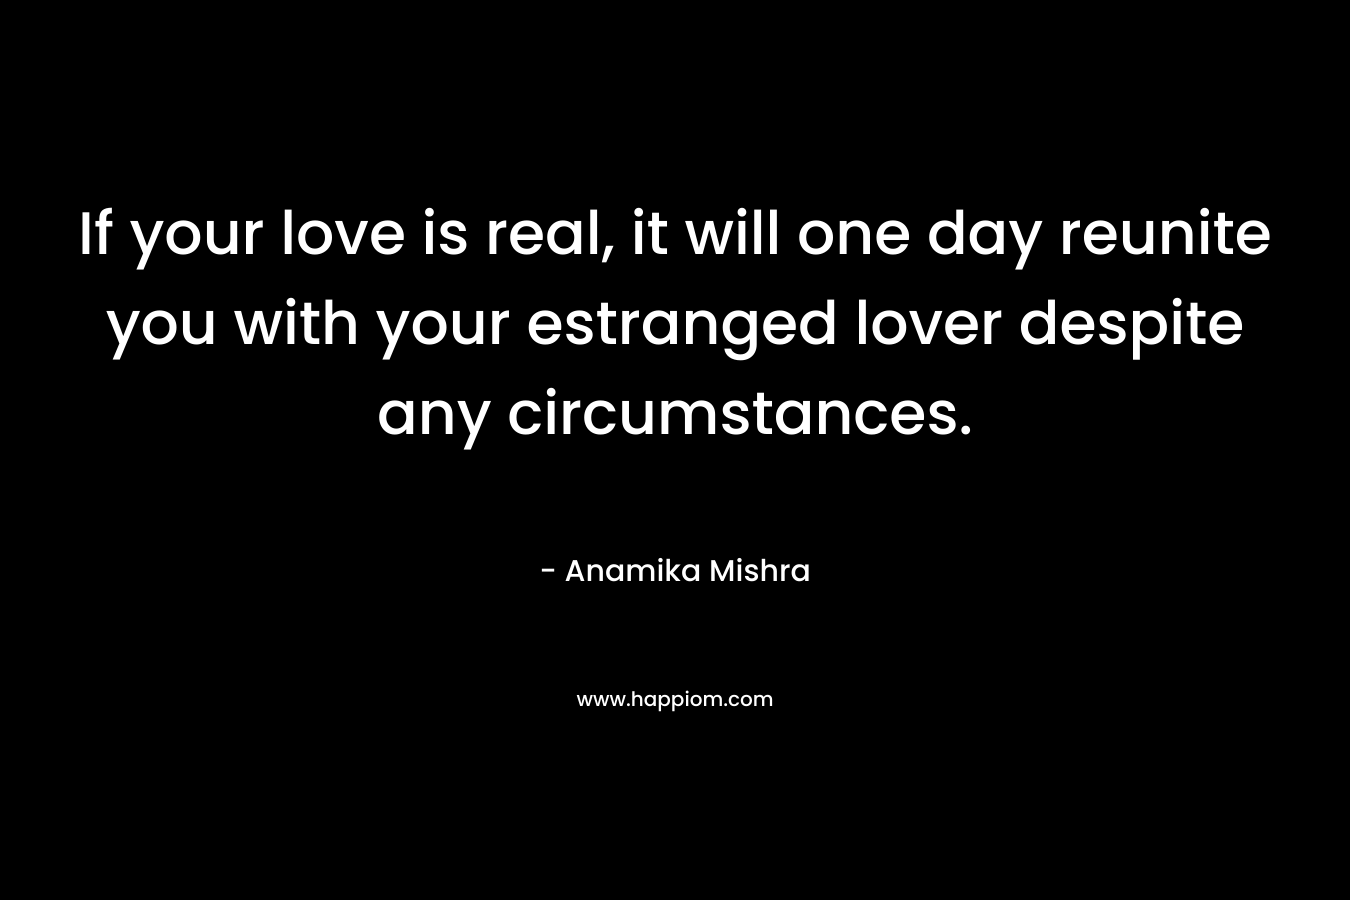 If your love is real, it will one day reunite you with your estranged lover despite any circumstances.